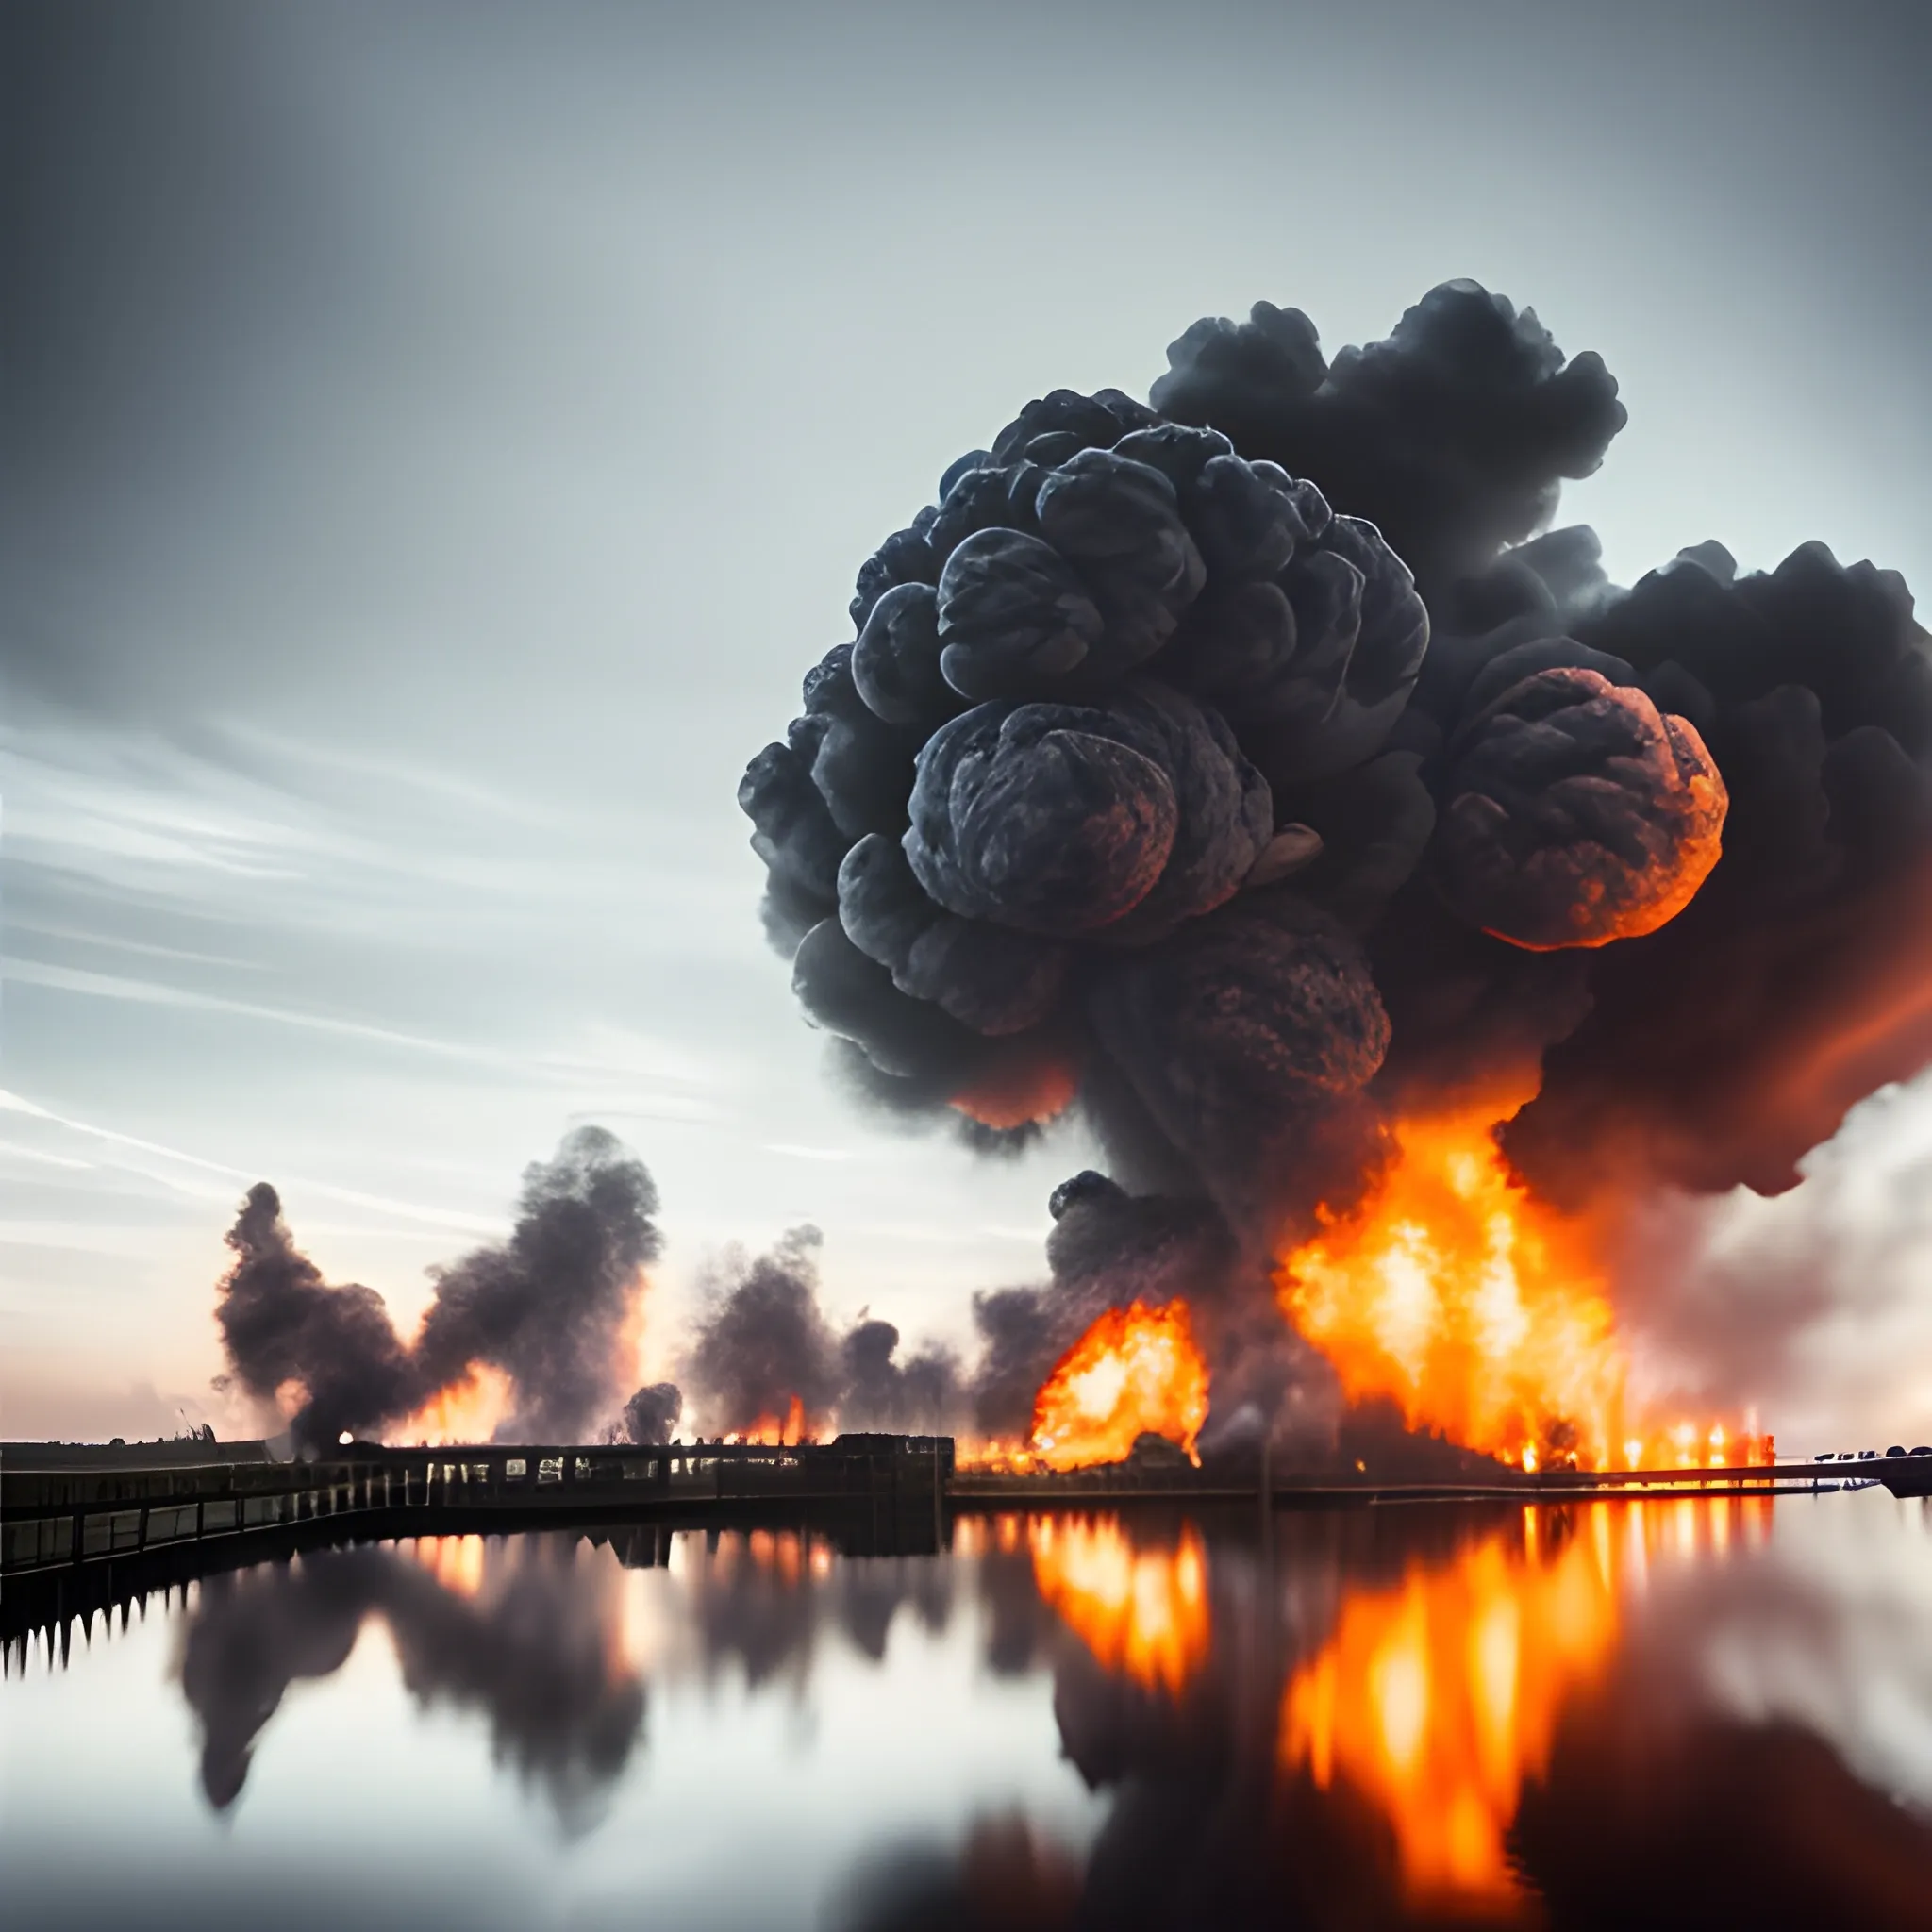 urne explosion, photography